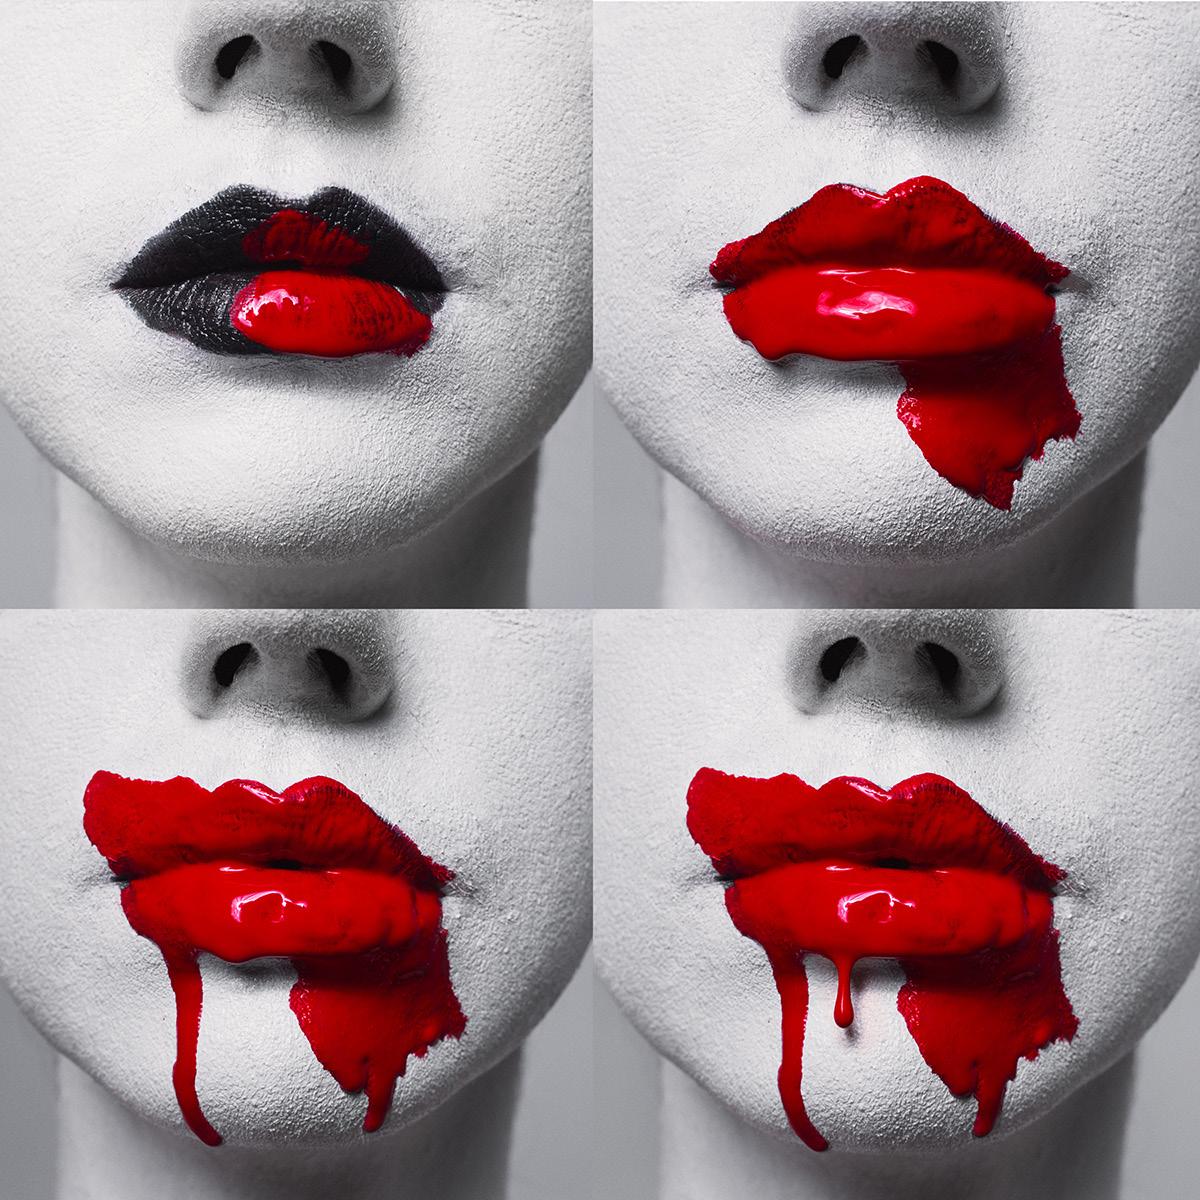 Series: Mouths
Chromogenic Print on Kodak Endura Luster Paper
All available sizes and editions:
18" x 18"
30" x 30"
45" x 45"
60" x 60"
70" x 70"
Editions of 3 + 2 Artist Proofs

Tyler Shields is a photographer, film director, and writer, best known